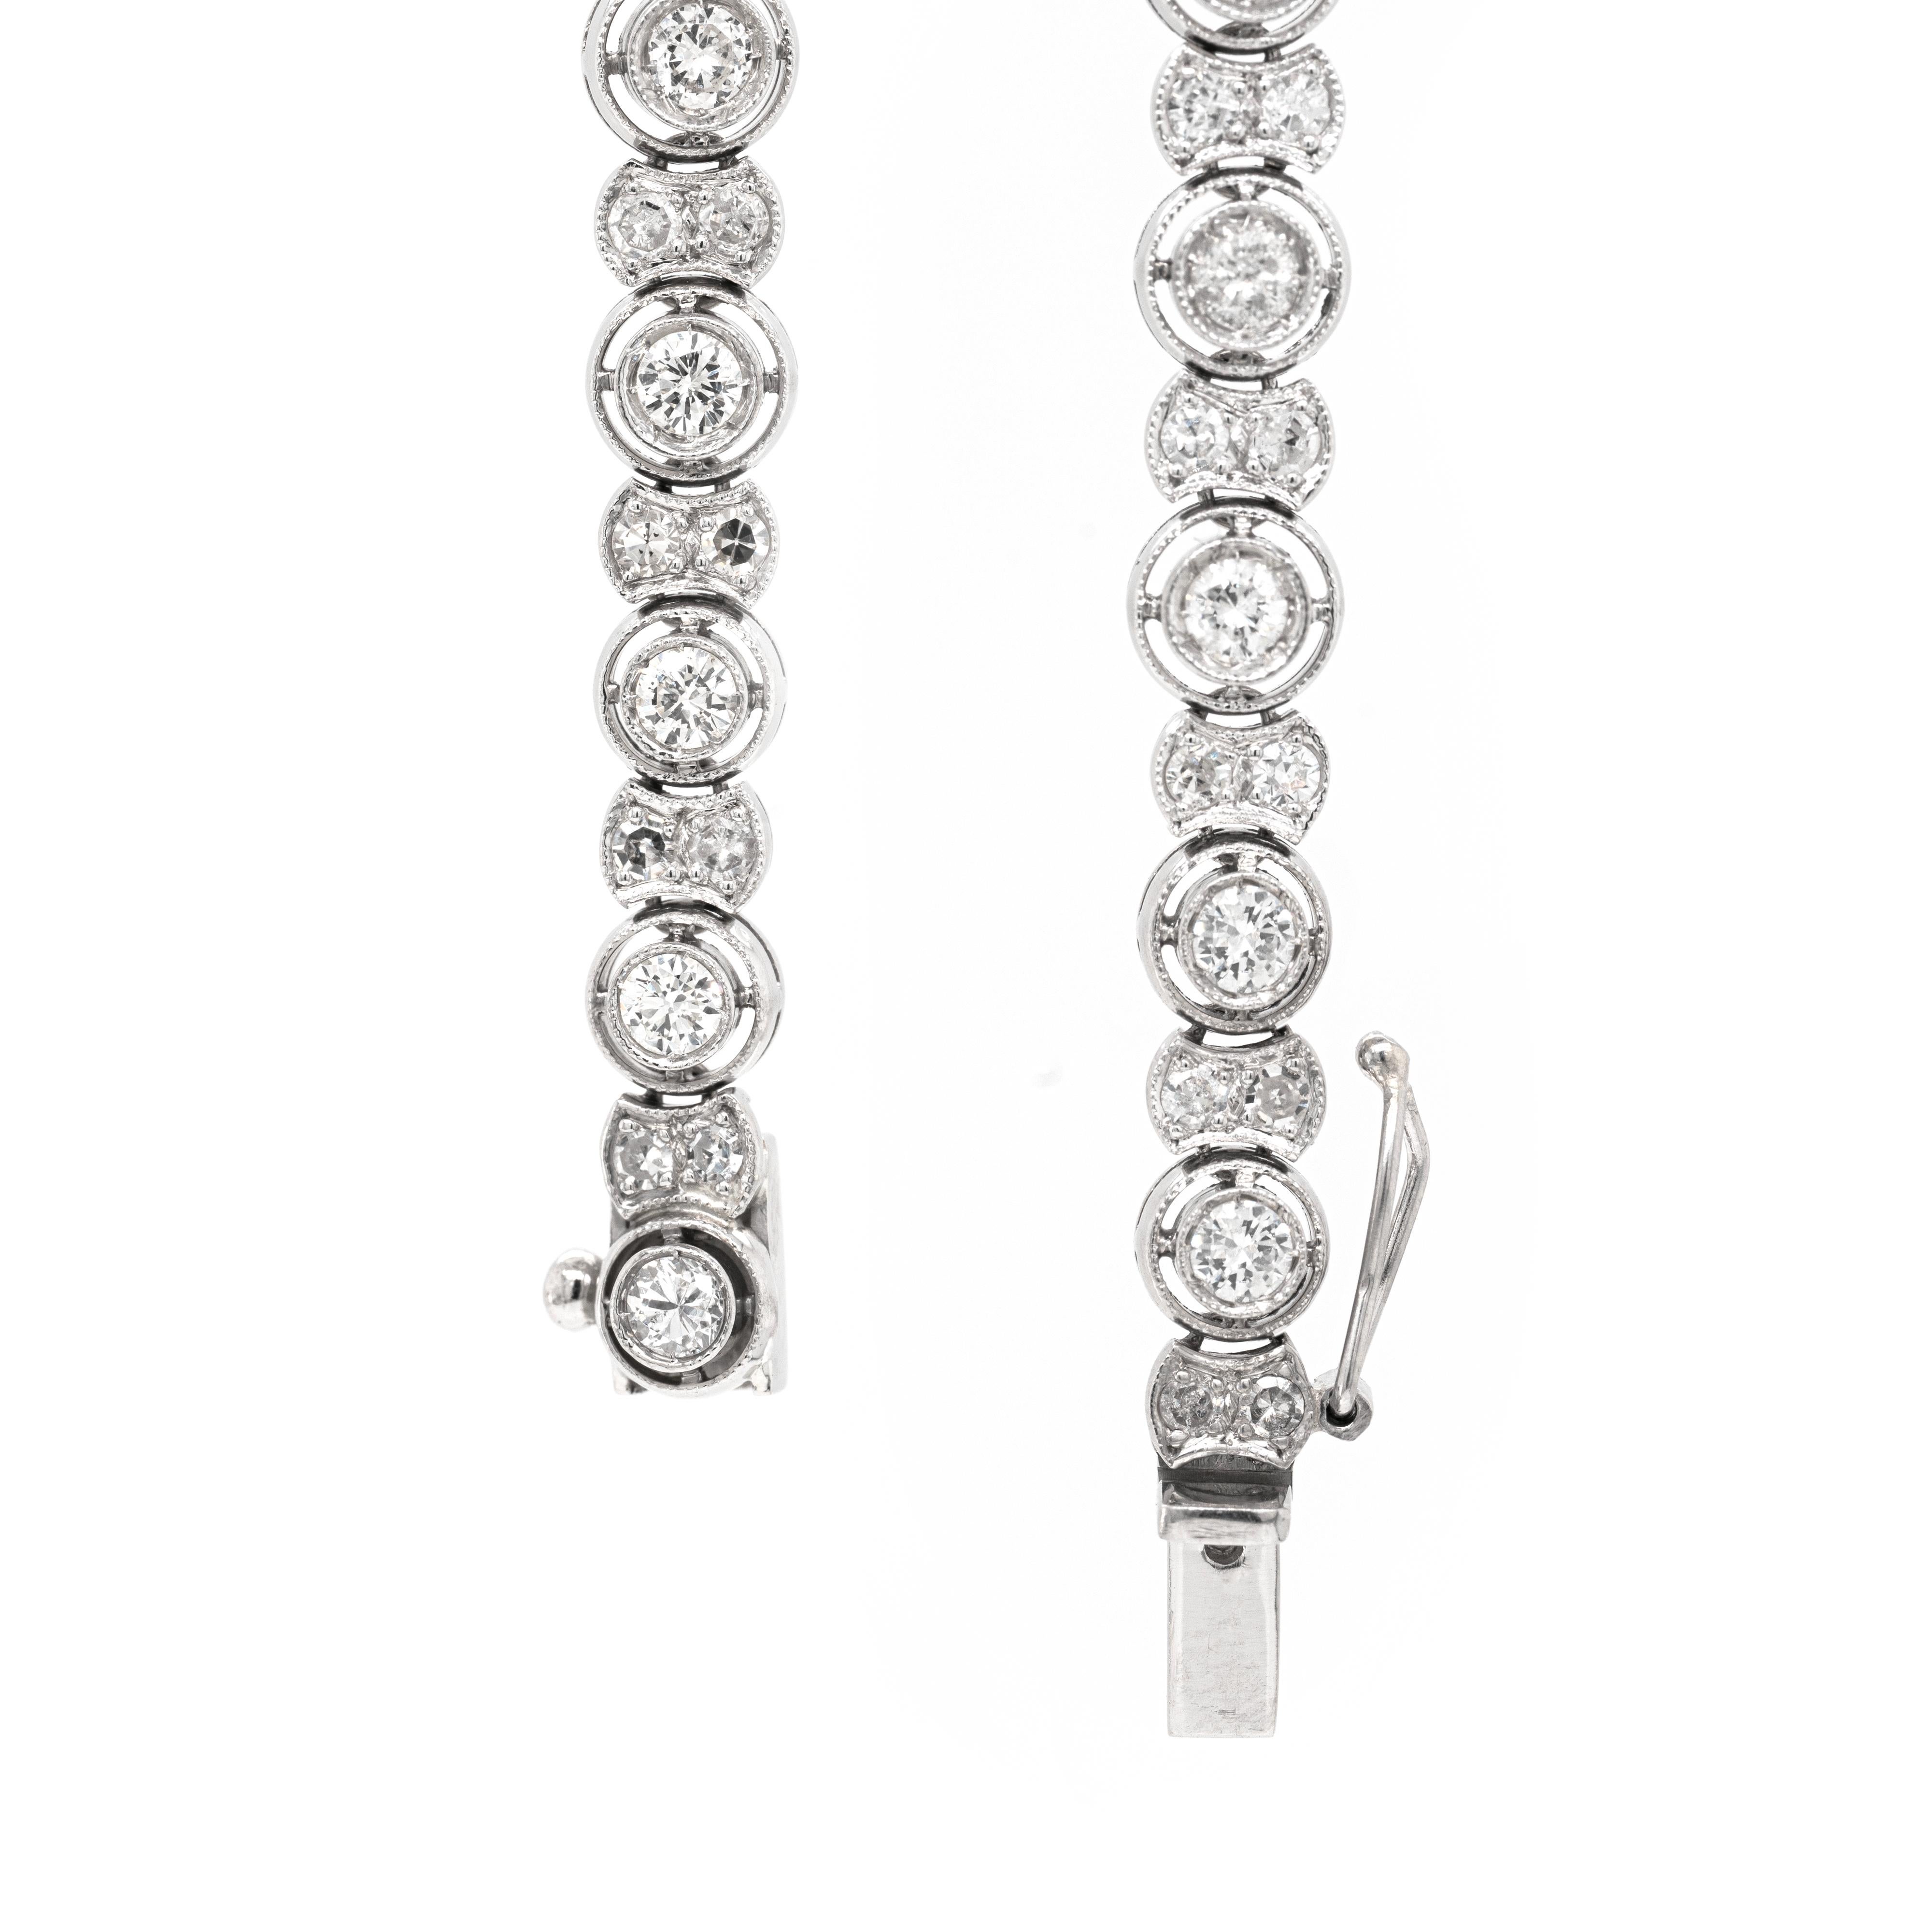 This vintage tennis bracelet features alternating links of a single round brilliant cut diamond in an open work rub-over setting and smaller links grain set with two eight cut diamonds, all mounted in platinum. Weighing in total approximately 4.50